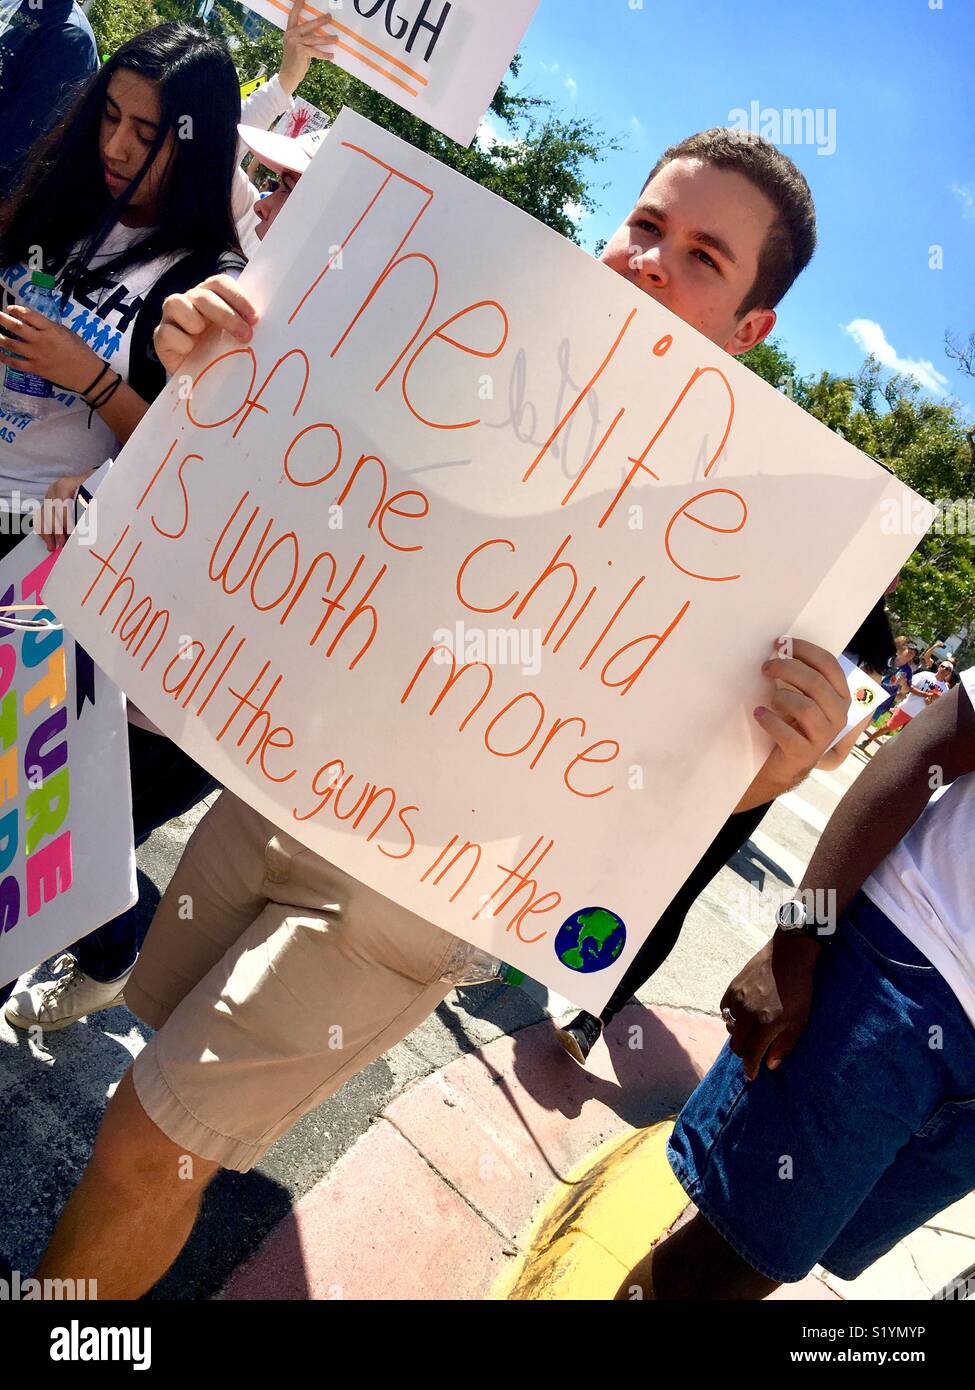 Miami Beach Florida “March For Our Lives.”  March 24, 2018 protest after Parkland, Florida school shootings. Stock Photo